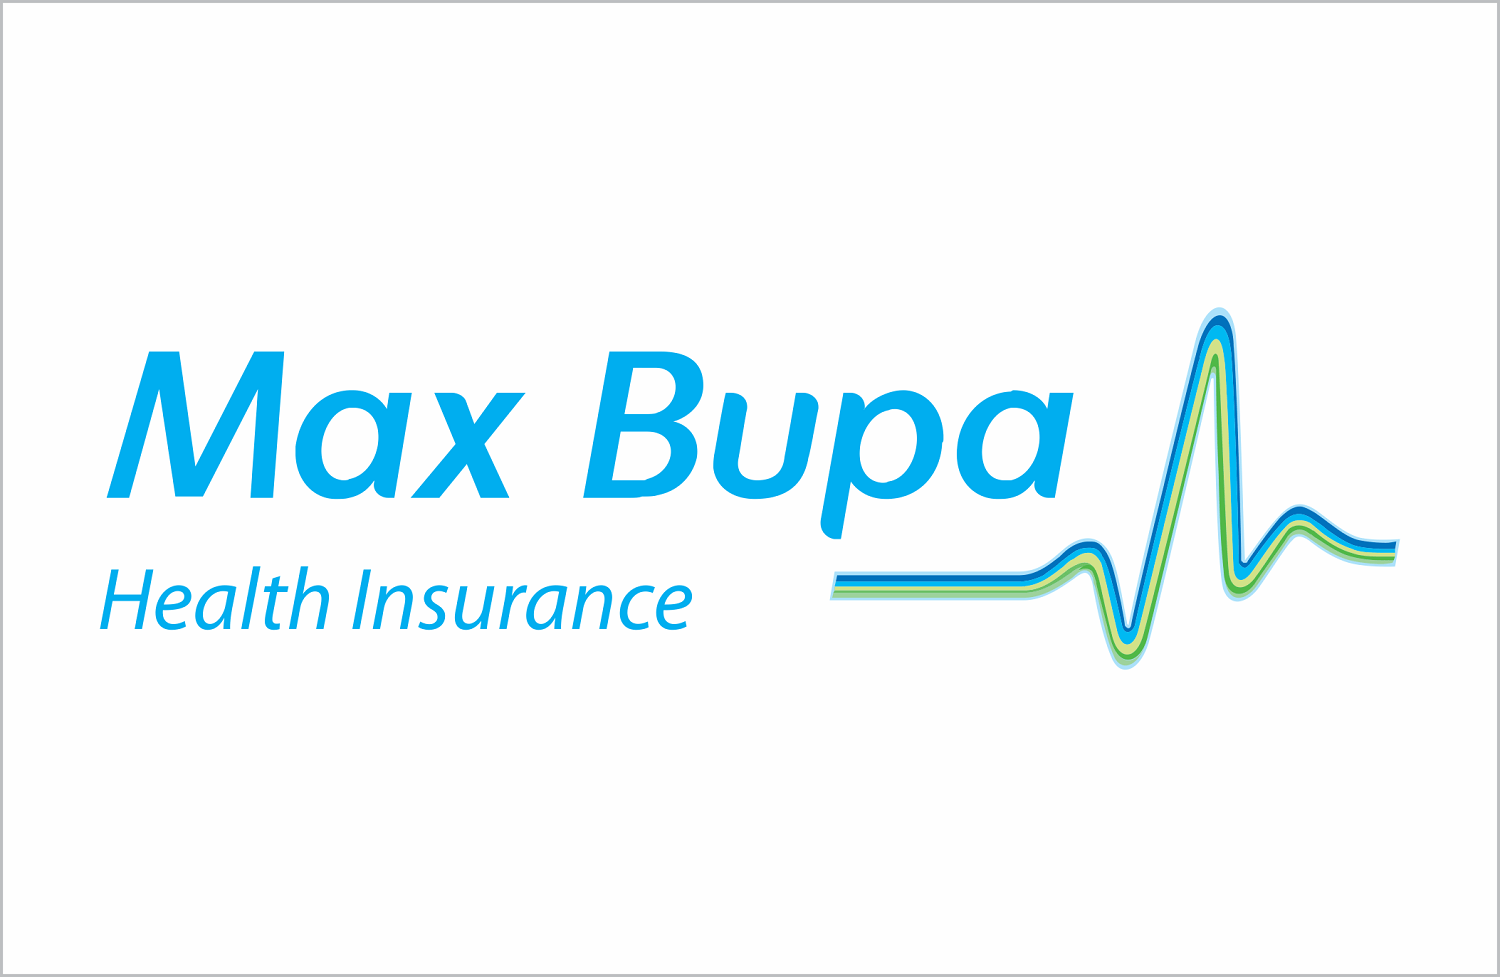 max bupa family first - cover 19 relationships in single plan